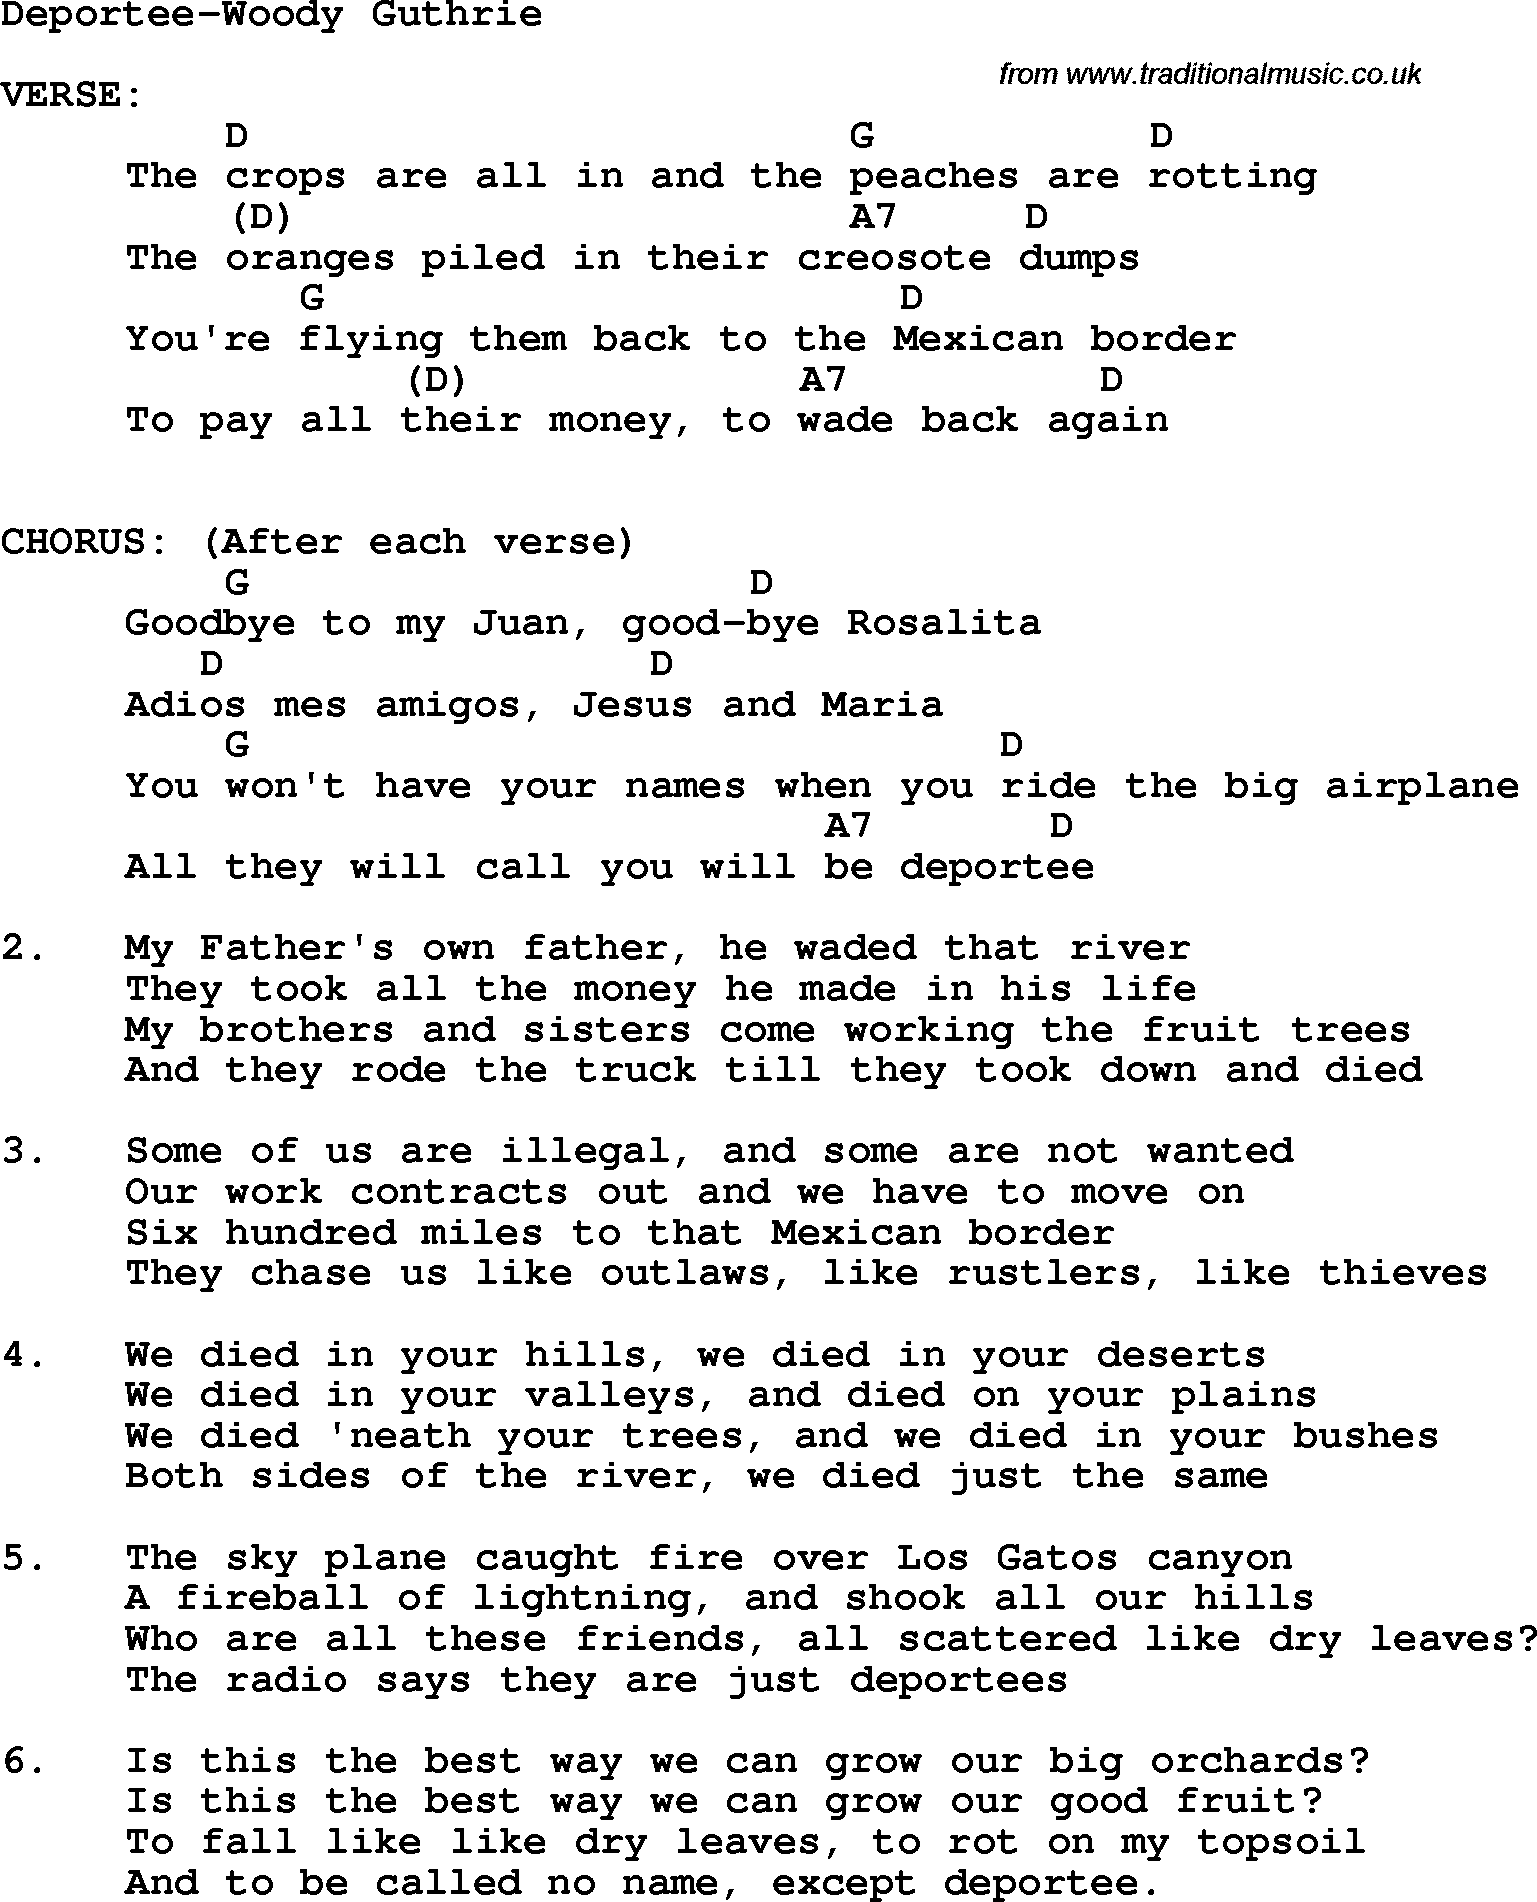 Protest Song Deportee-Woody Guthrie lyrics and chords